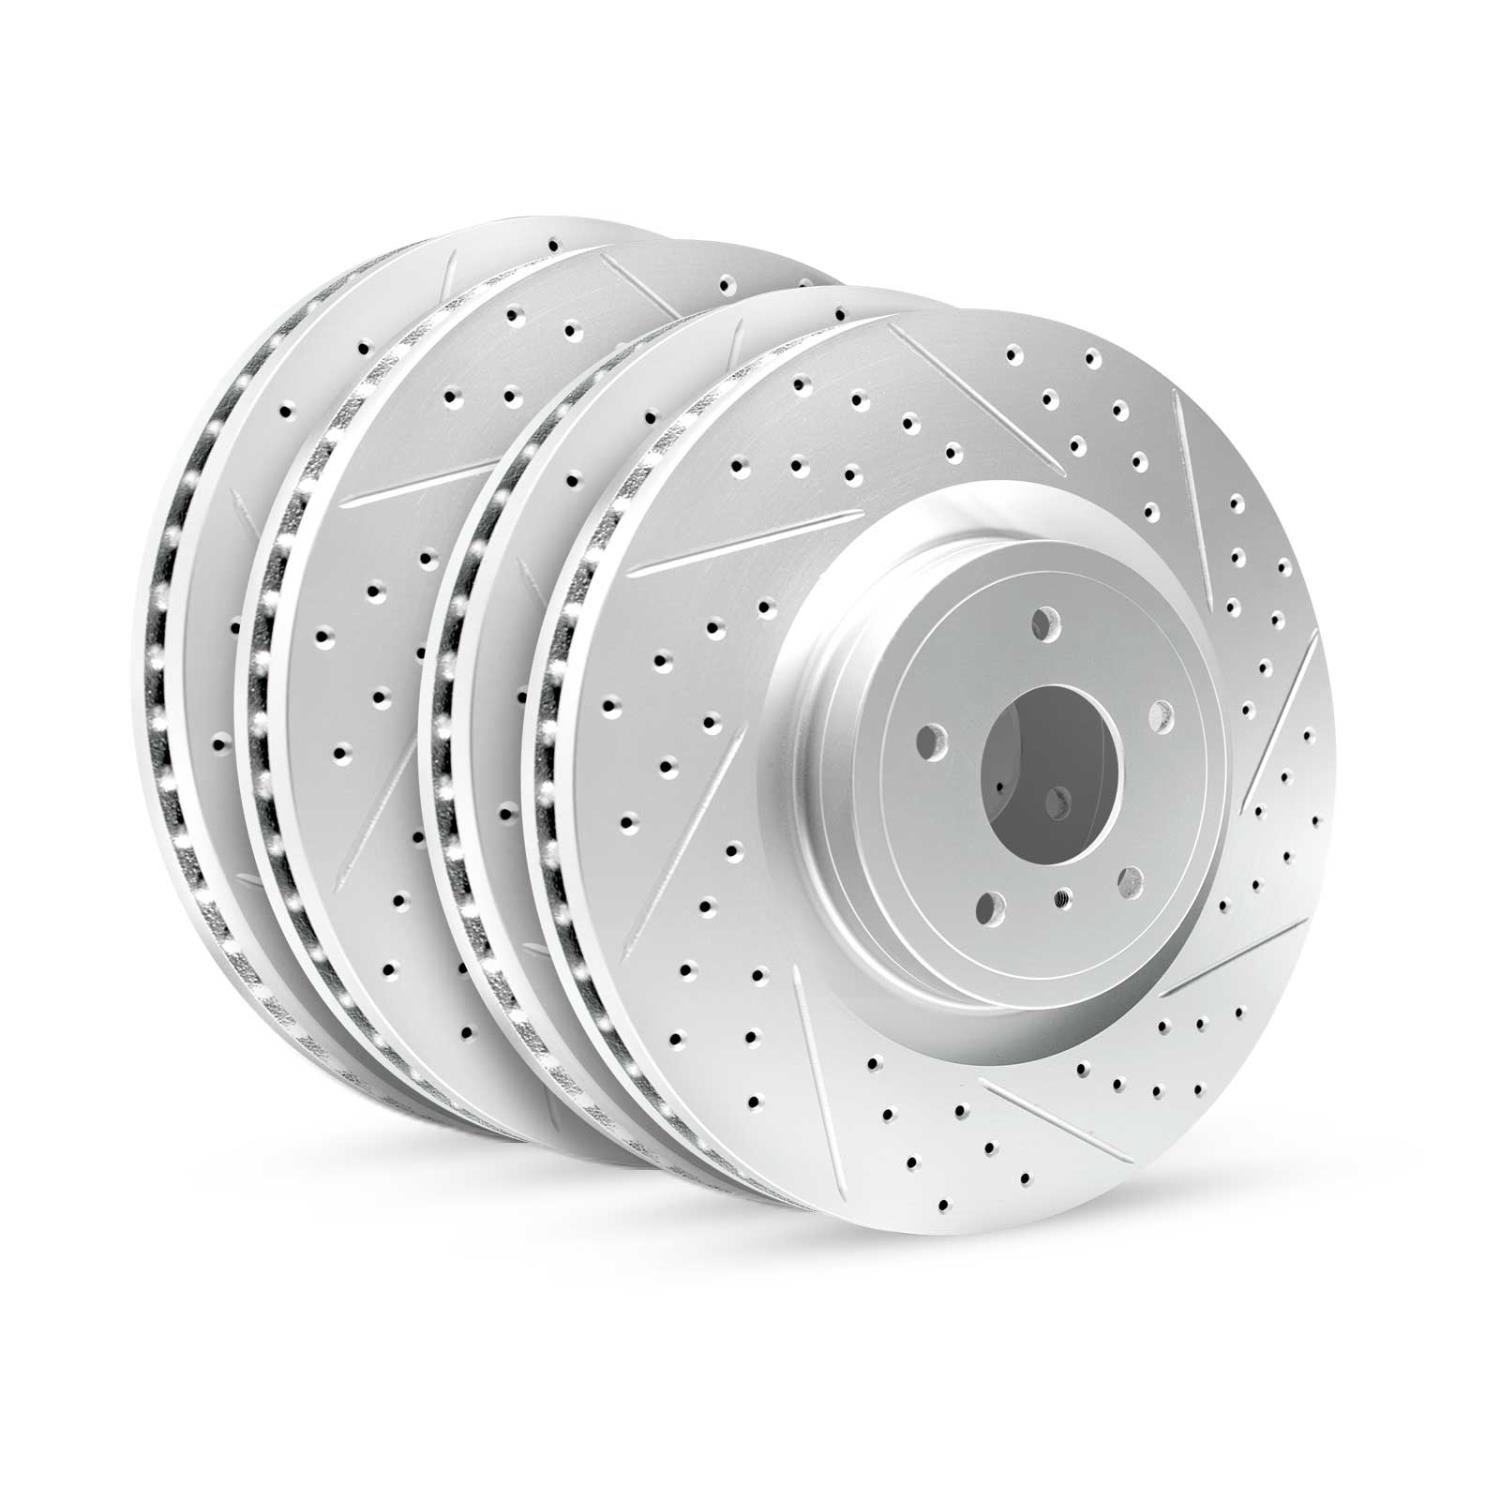 GEO-Carbon Drilled/Slotted Rotors, 2006-2014 Kia/Hyundai/Genesis, Position: Front/Rear